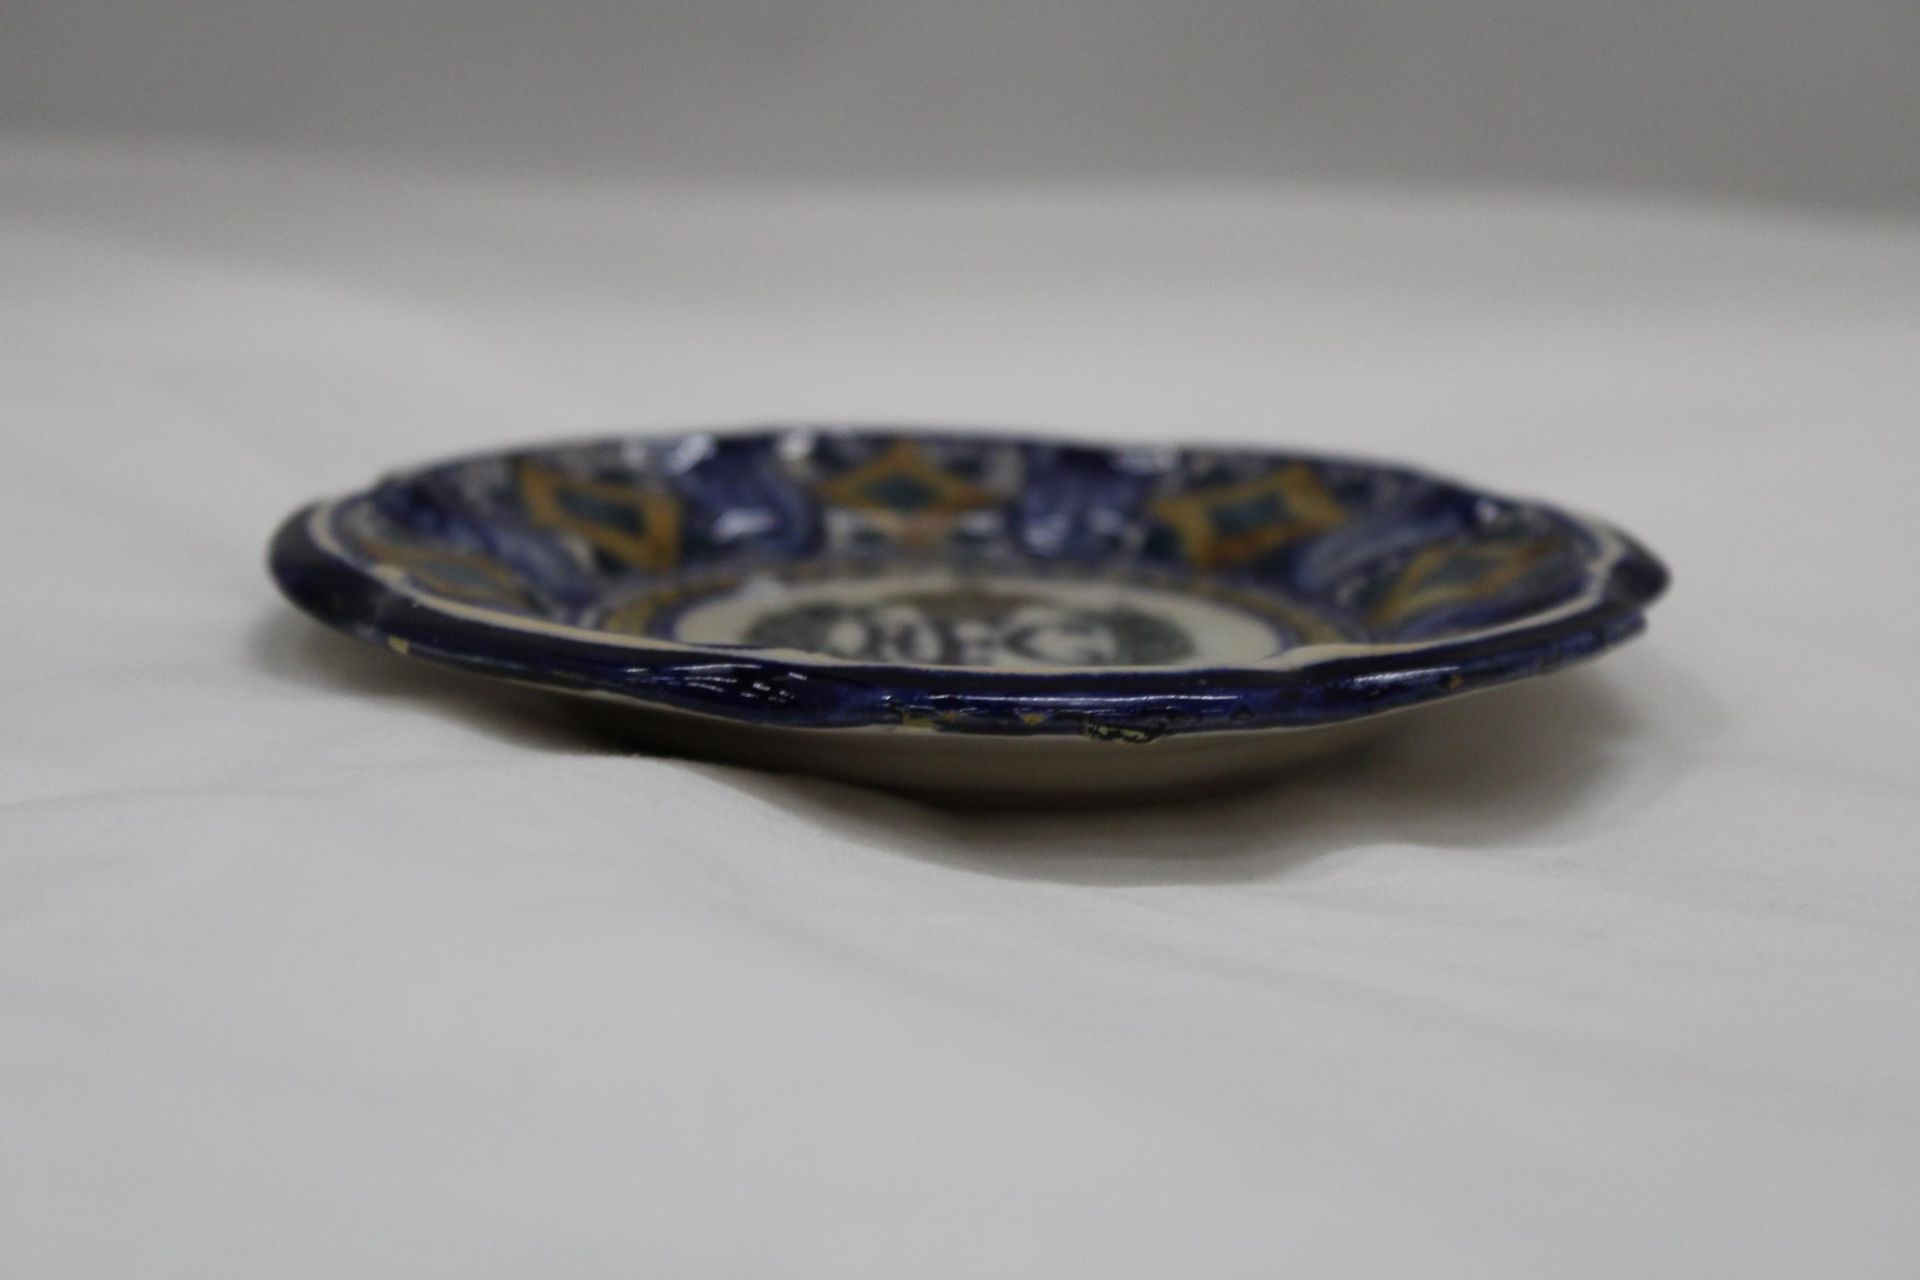 A VINTAGE CONTINENTAL SMALL PLATE WITH THE LOGO FOR THE ROYAL FLYING CORPS - Image 3 of 4